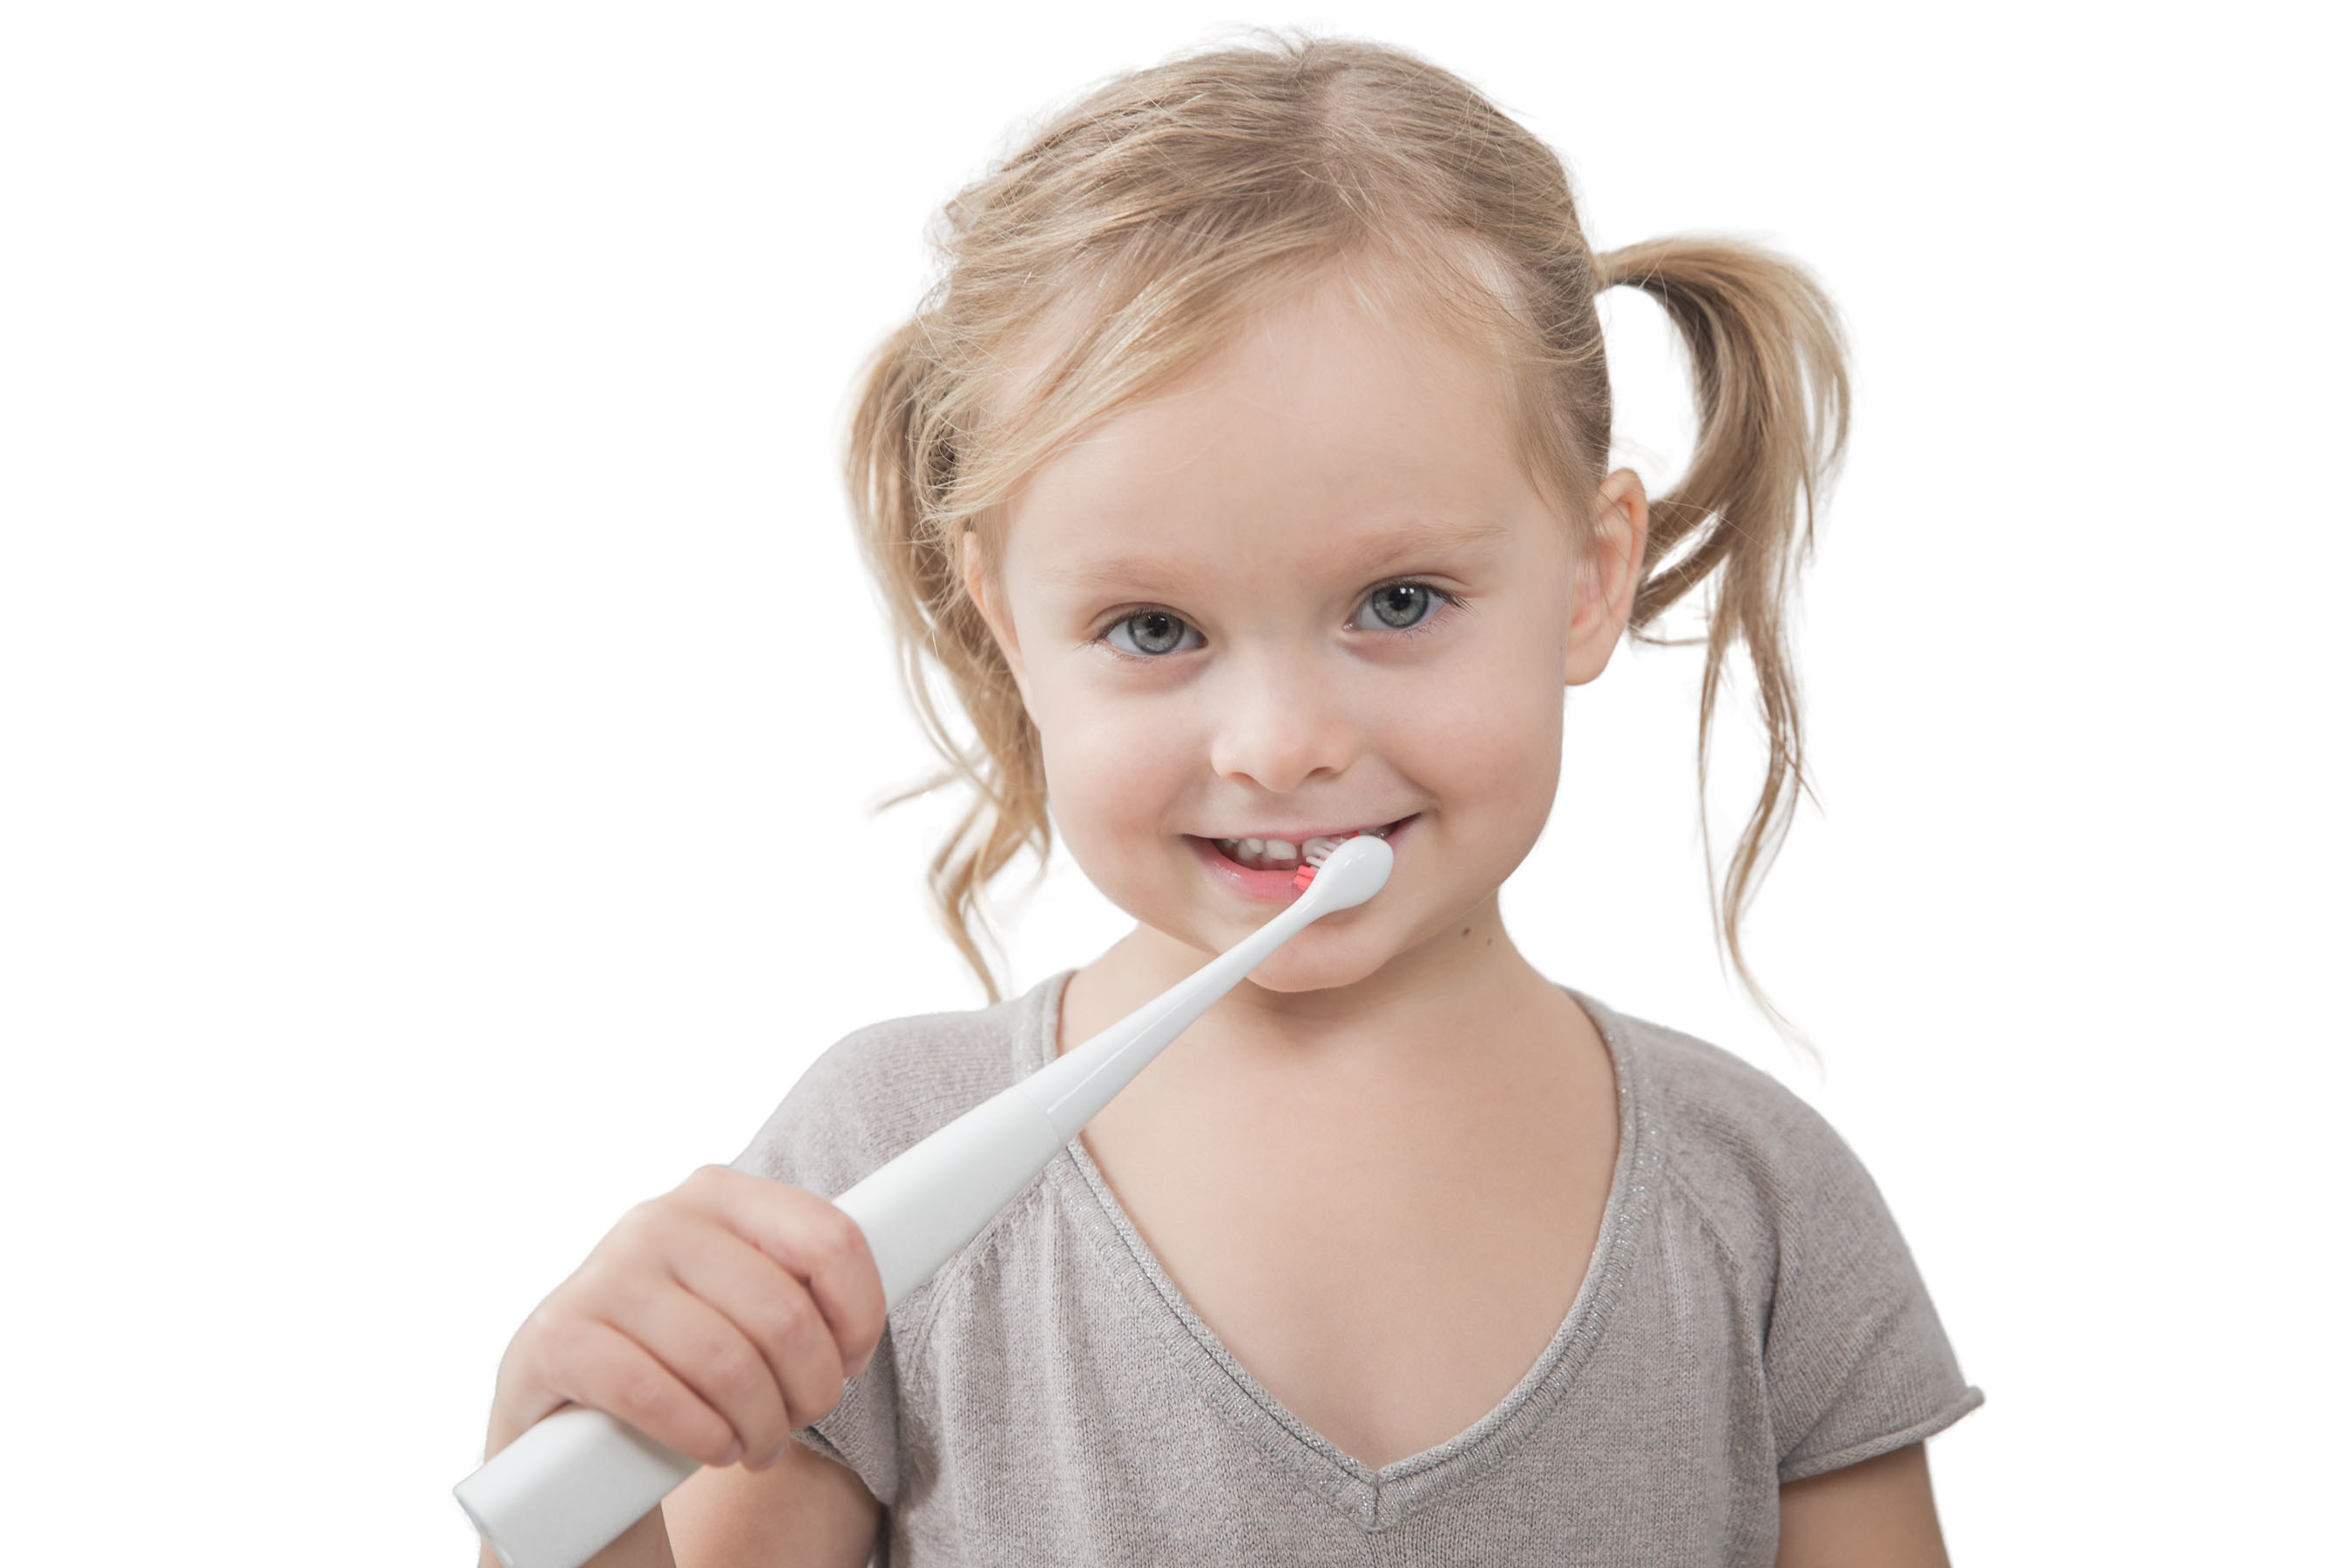 Kolibree's new smart sonic toothbrush is Bluetooth connected and user-friendly at any age, and the Go Pirate 2 app for iOS makes toothbrushing fun while helping to prevent cavities and improve oral health. It's intelligence at play! www.kolibree.com